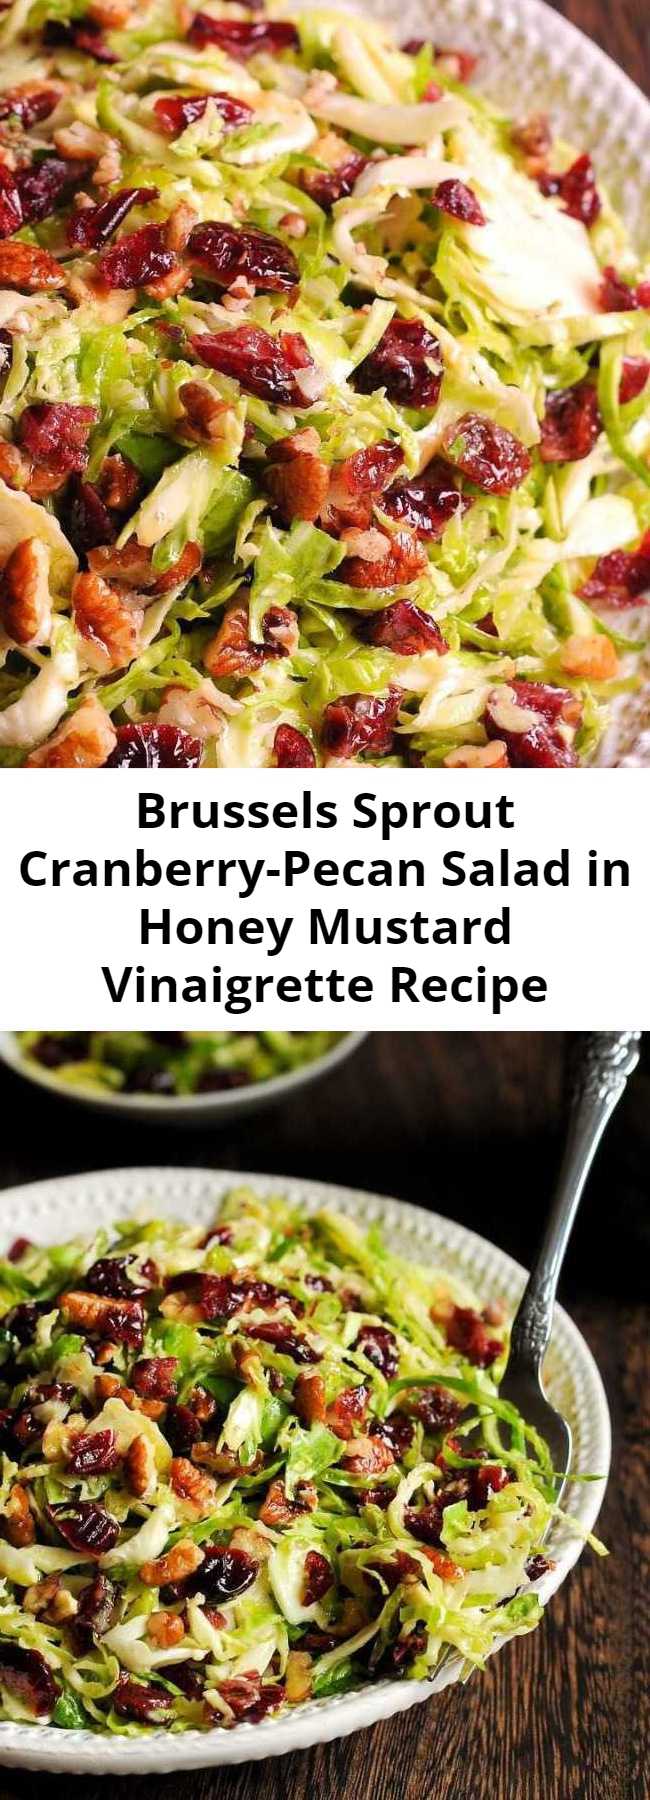 Brussels Sprout Cranberry-Pecan Salad in Honey Mustard Vinaigrette Recipe - This delicious Honey Mustard Brussels Sprout Salad with Cranberries and Pecans is all about crisp, shredded Brussels sprouts tossed with slightly sweet honey mustard vinaigrette, dried cranberries and chopped pecans. Perfect for potlucks or holiday meals, but you may find it to be a perfect complement to your everyday dinner as well. And it’s gluten-free! #salad #fall #thanksgiving #holiday #christmas #healthy